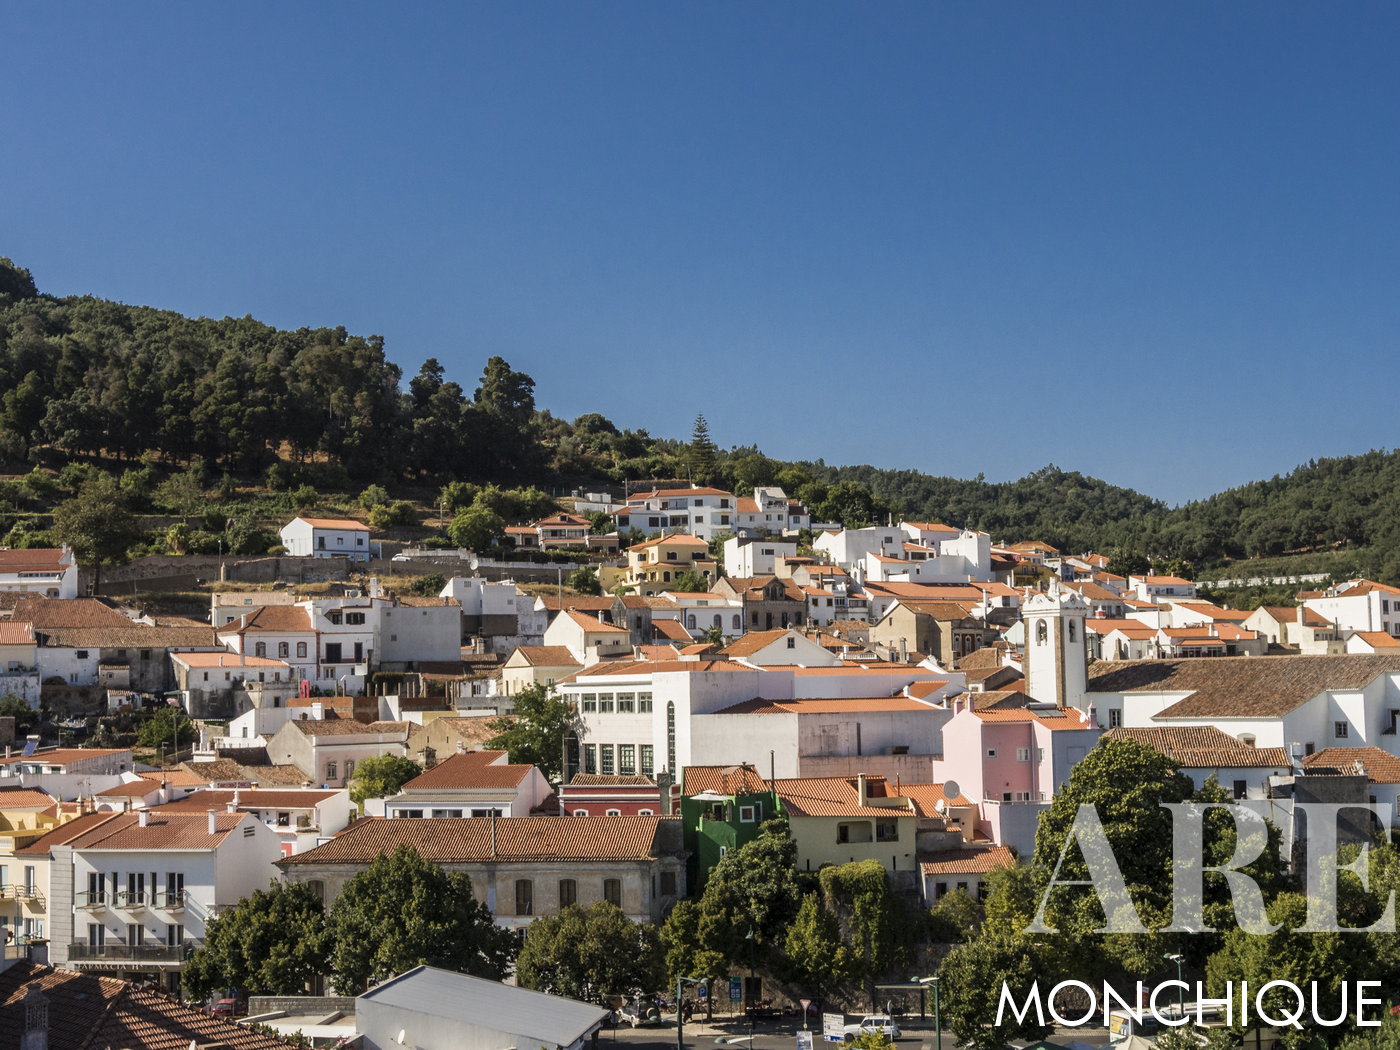 Monchique: The Highest Town in the Algarve